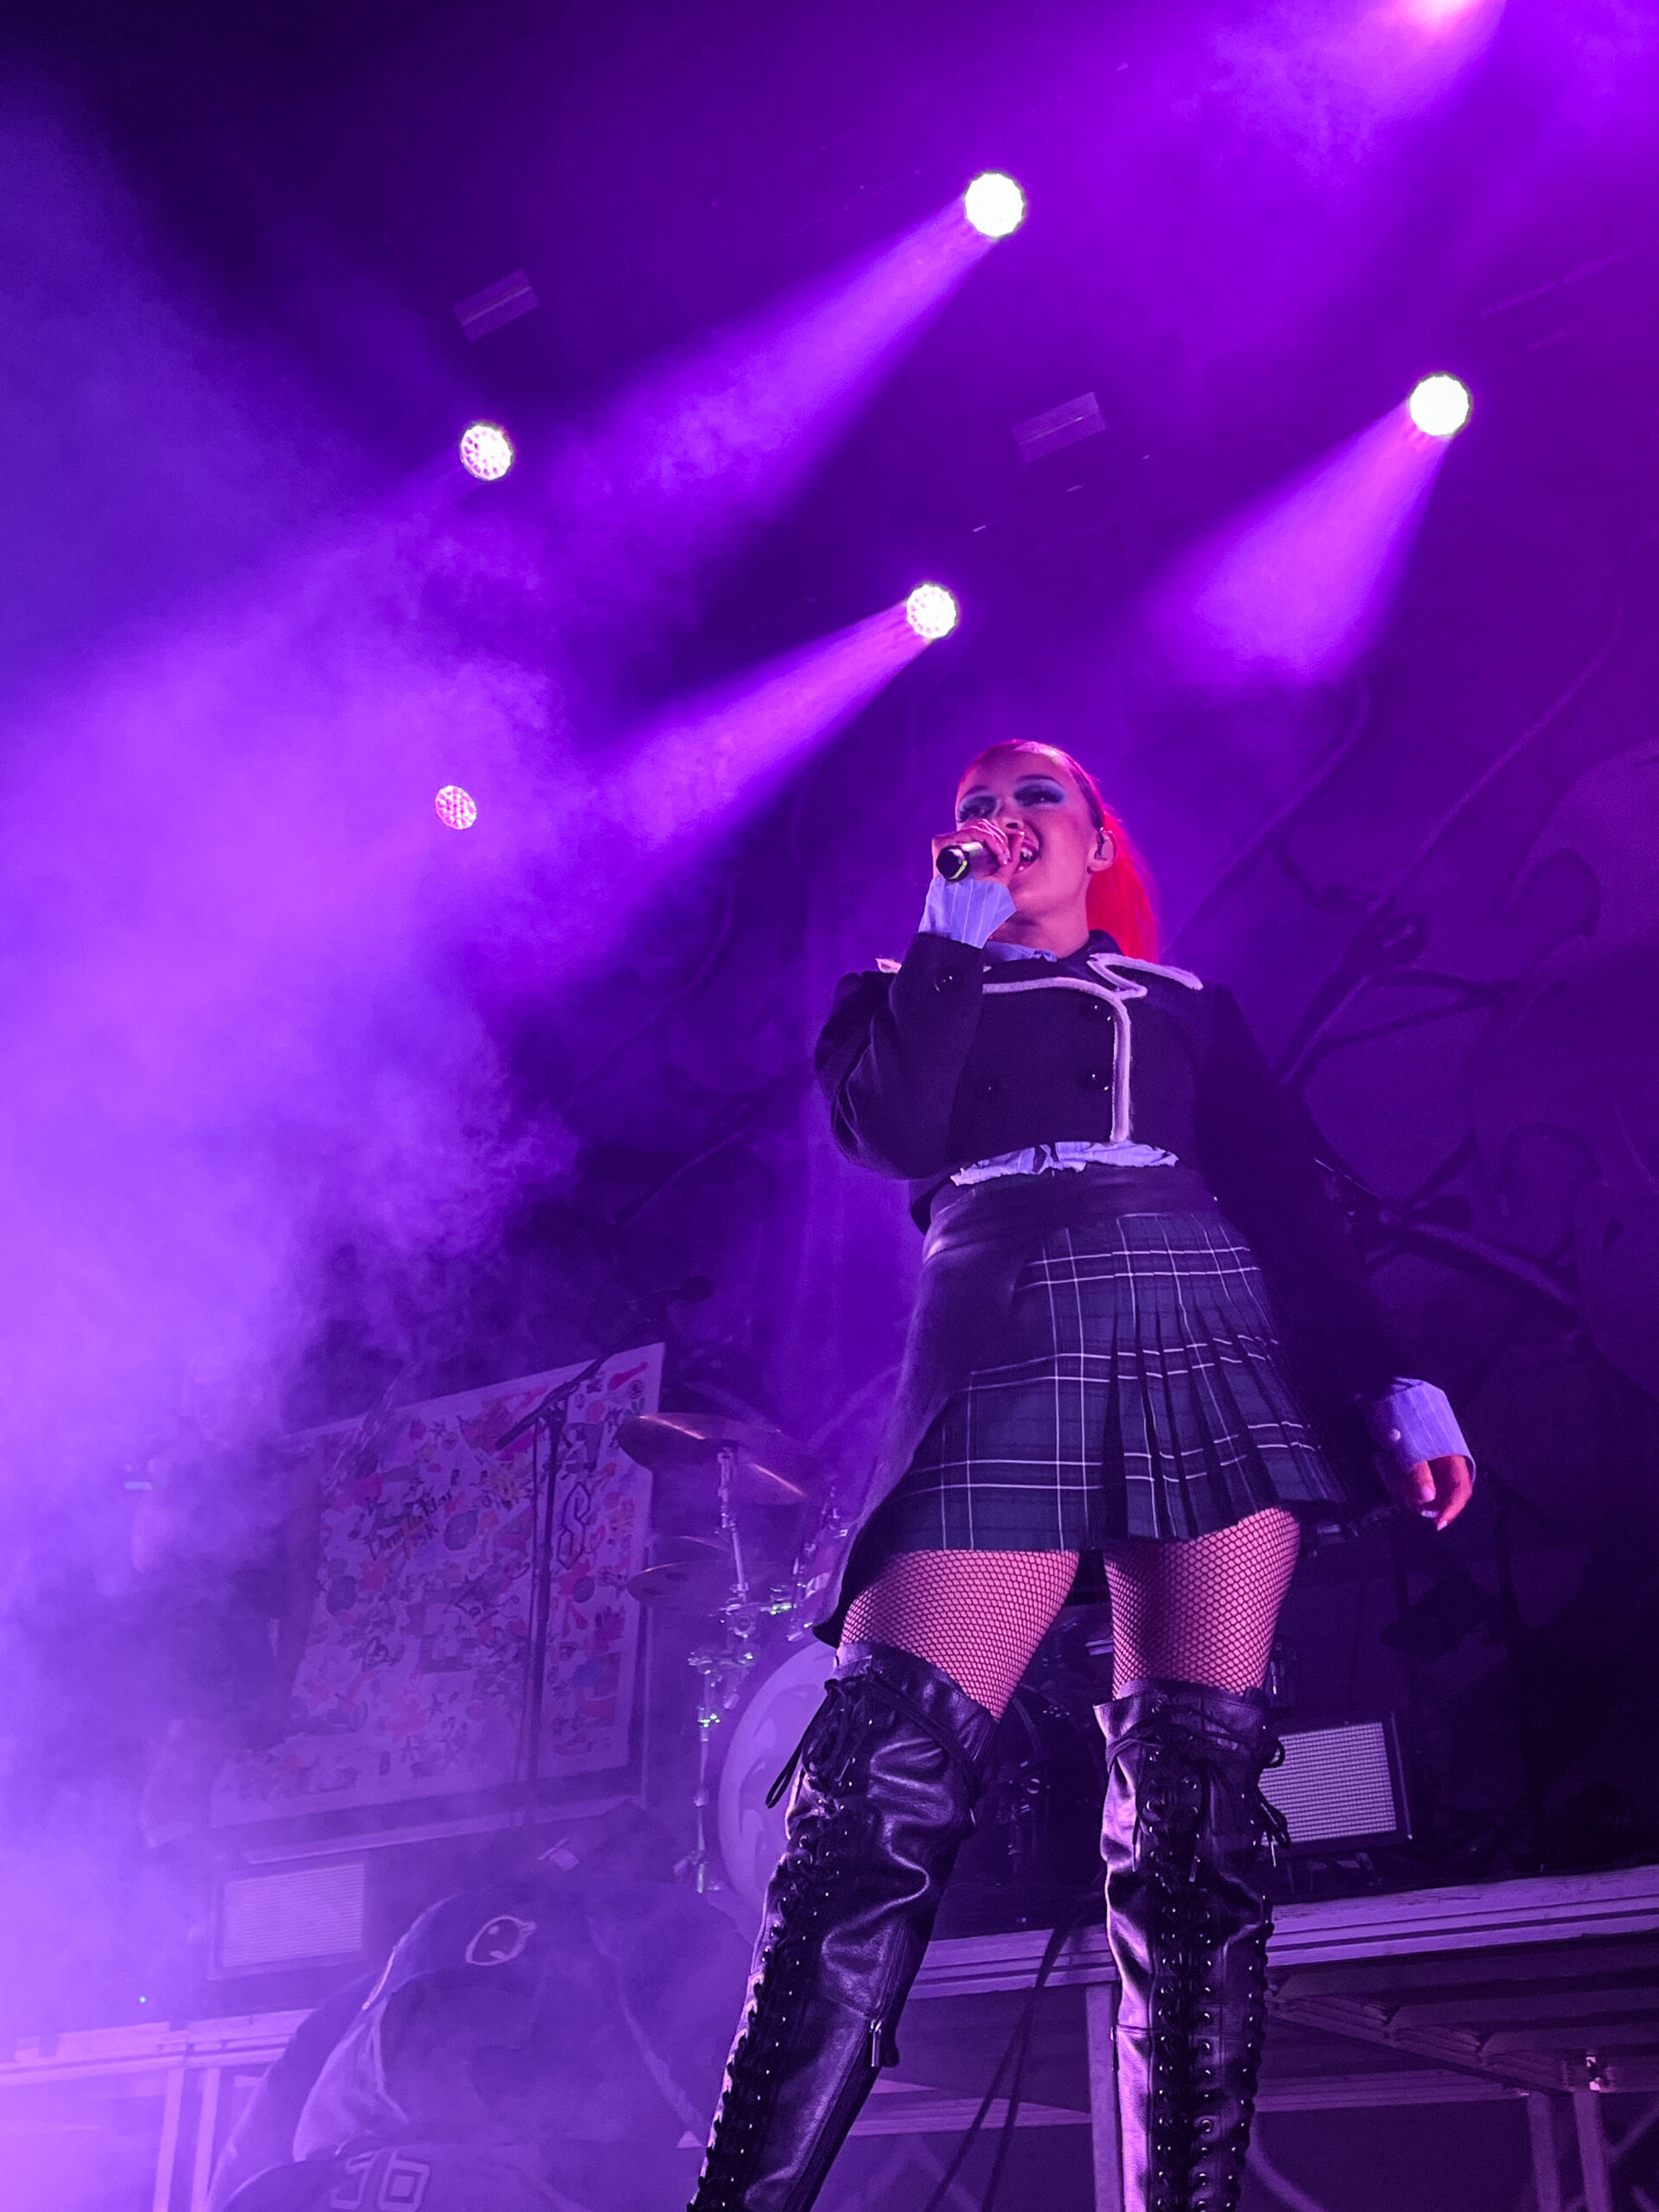 Daniela Rathana sings on stage. She wears tall leather boots, a short plaid skirt and short black blazer. Her hair is bright red and put up in a high ponytail. A drum set is visible in the background